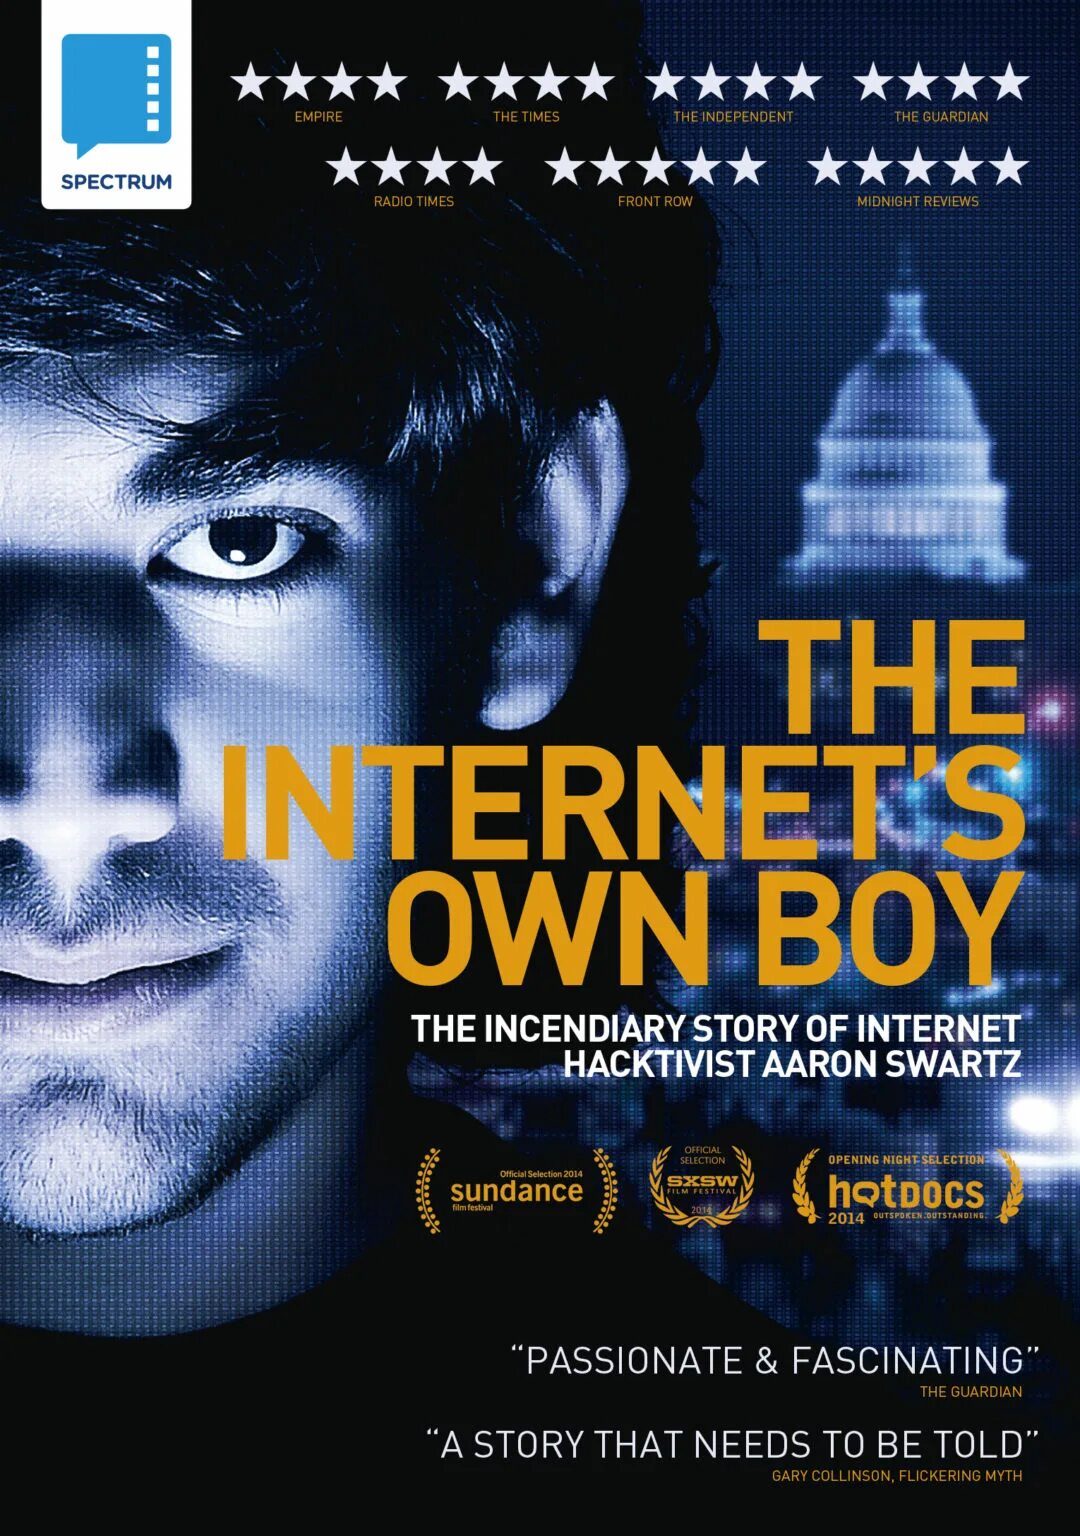 The Internet’s own boy. The Internet’s own boy (2014). Poster the Internet’s own boy. The Internet's own boy PNG. Own boy